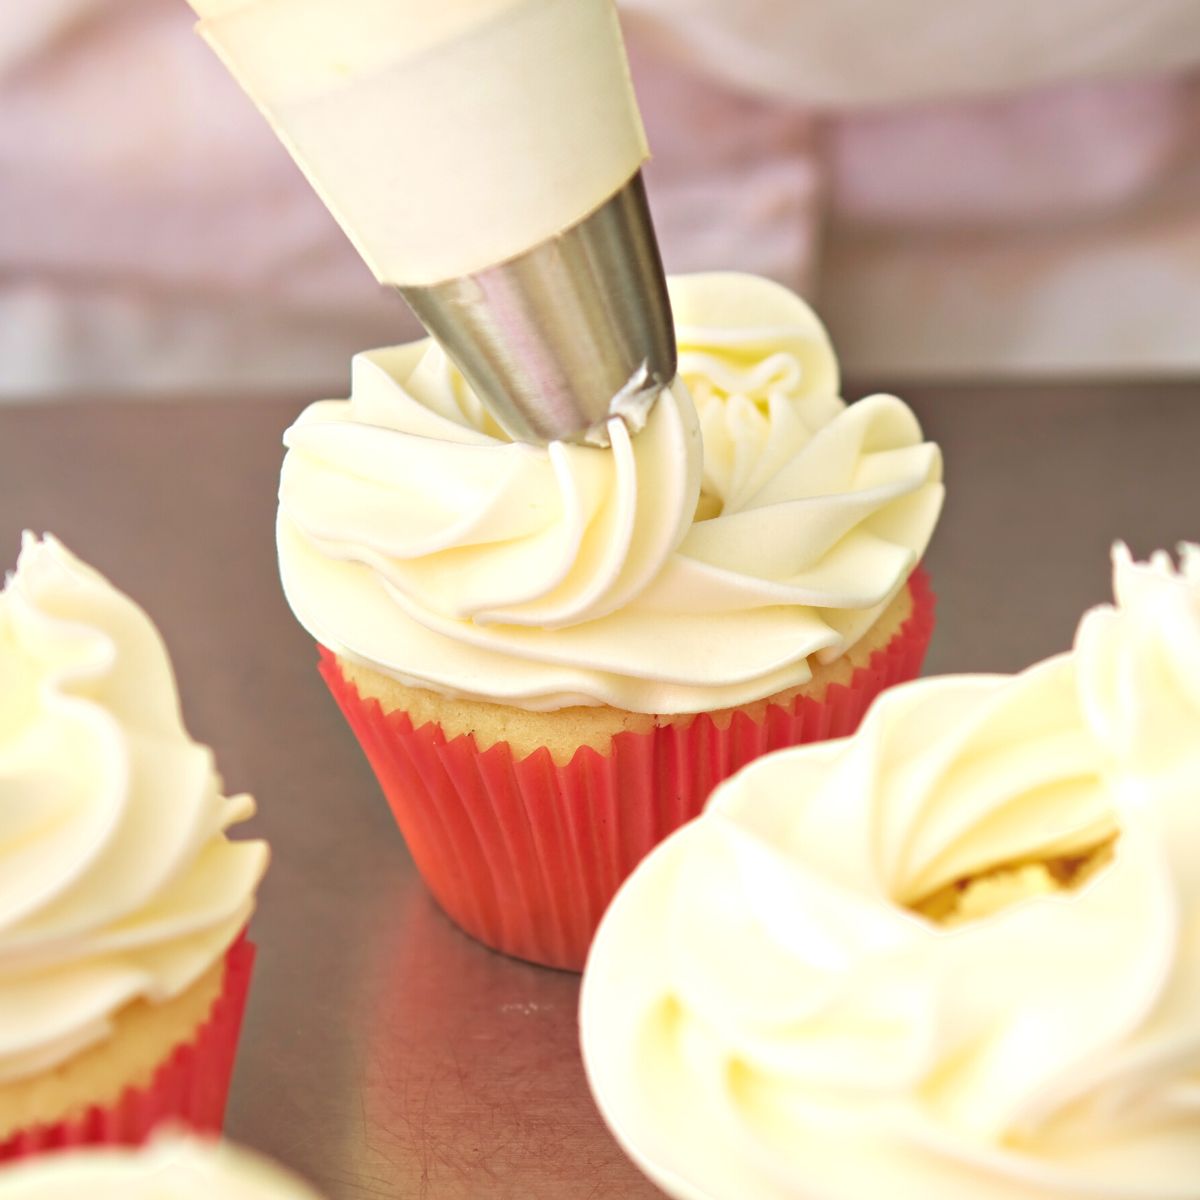 Piping champagne frosting onto cupcakes